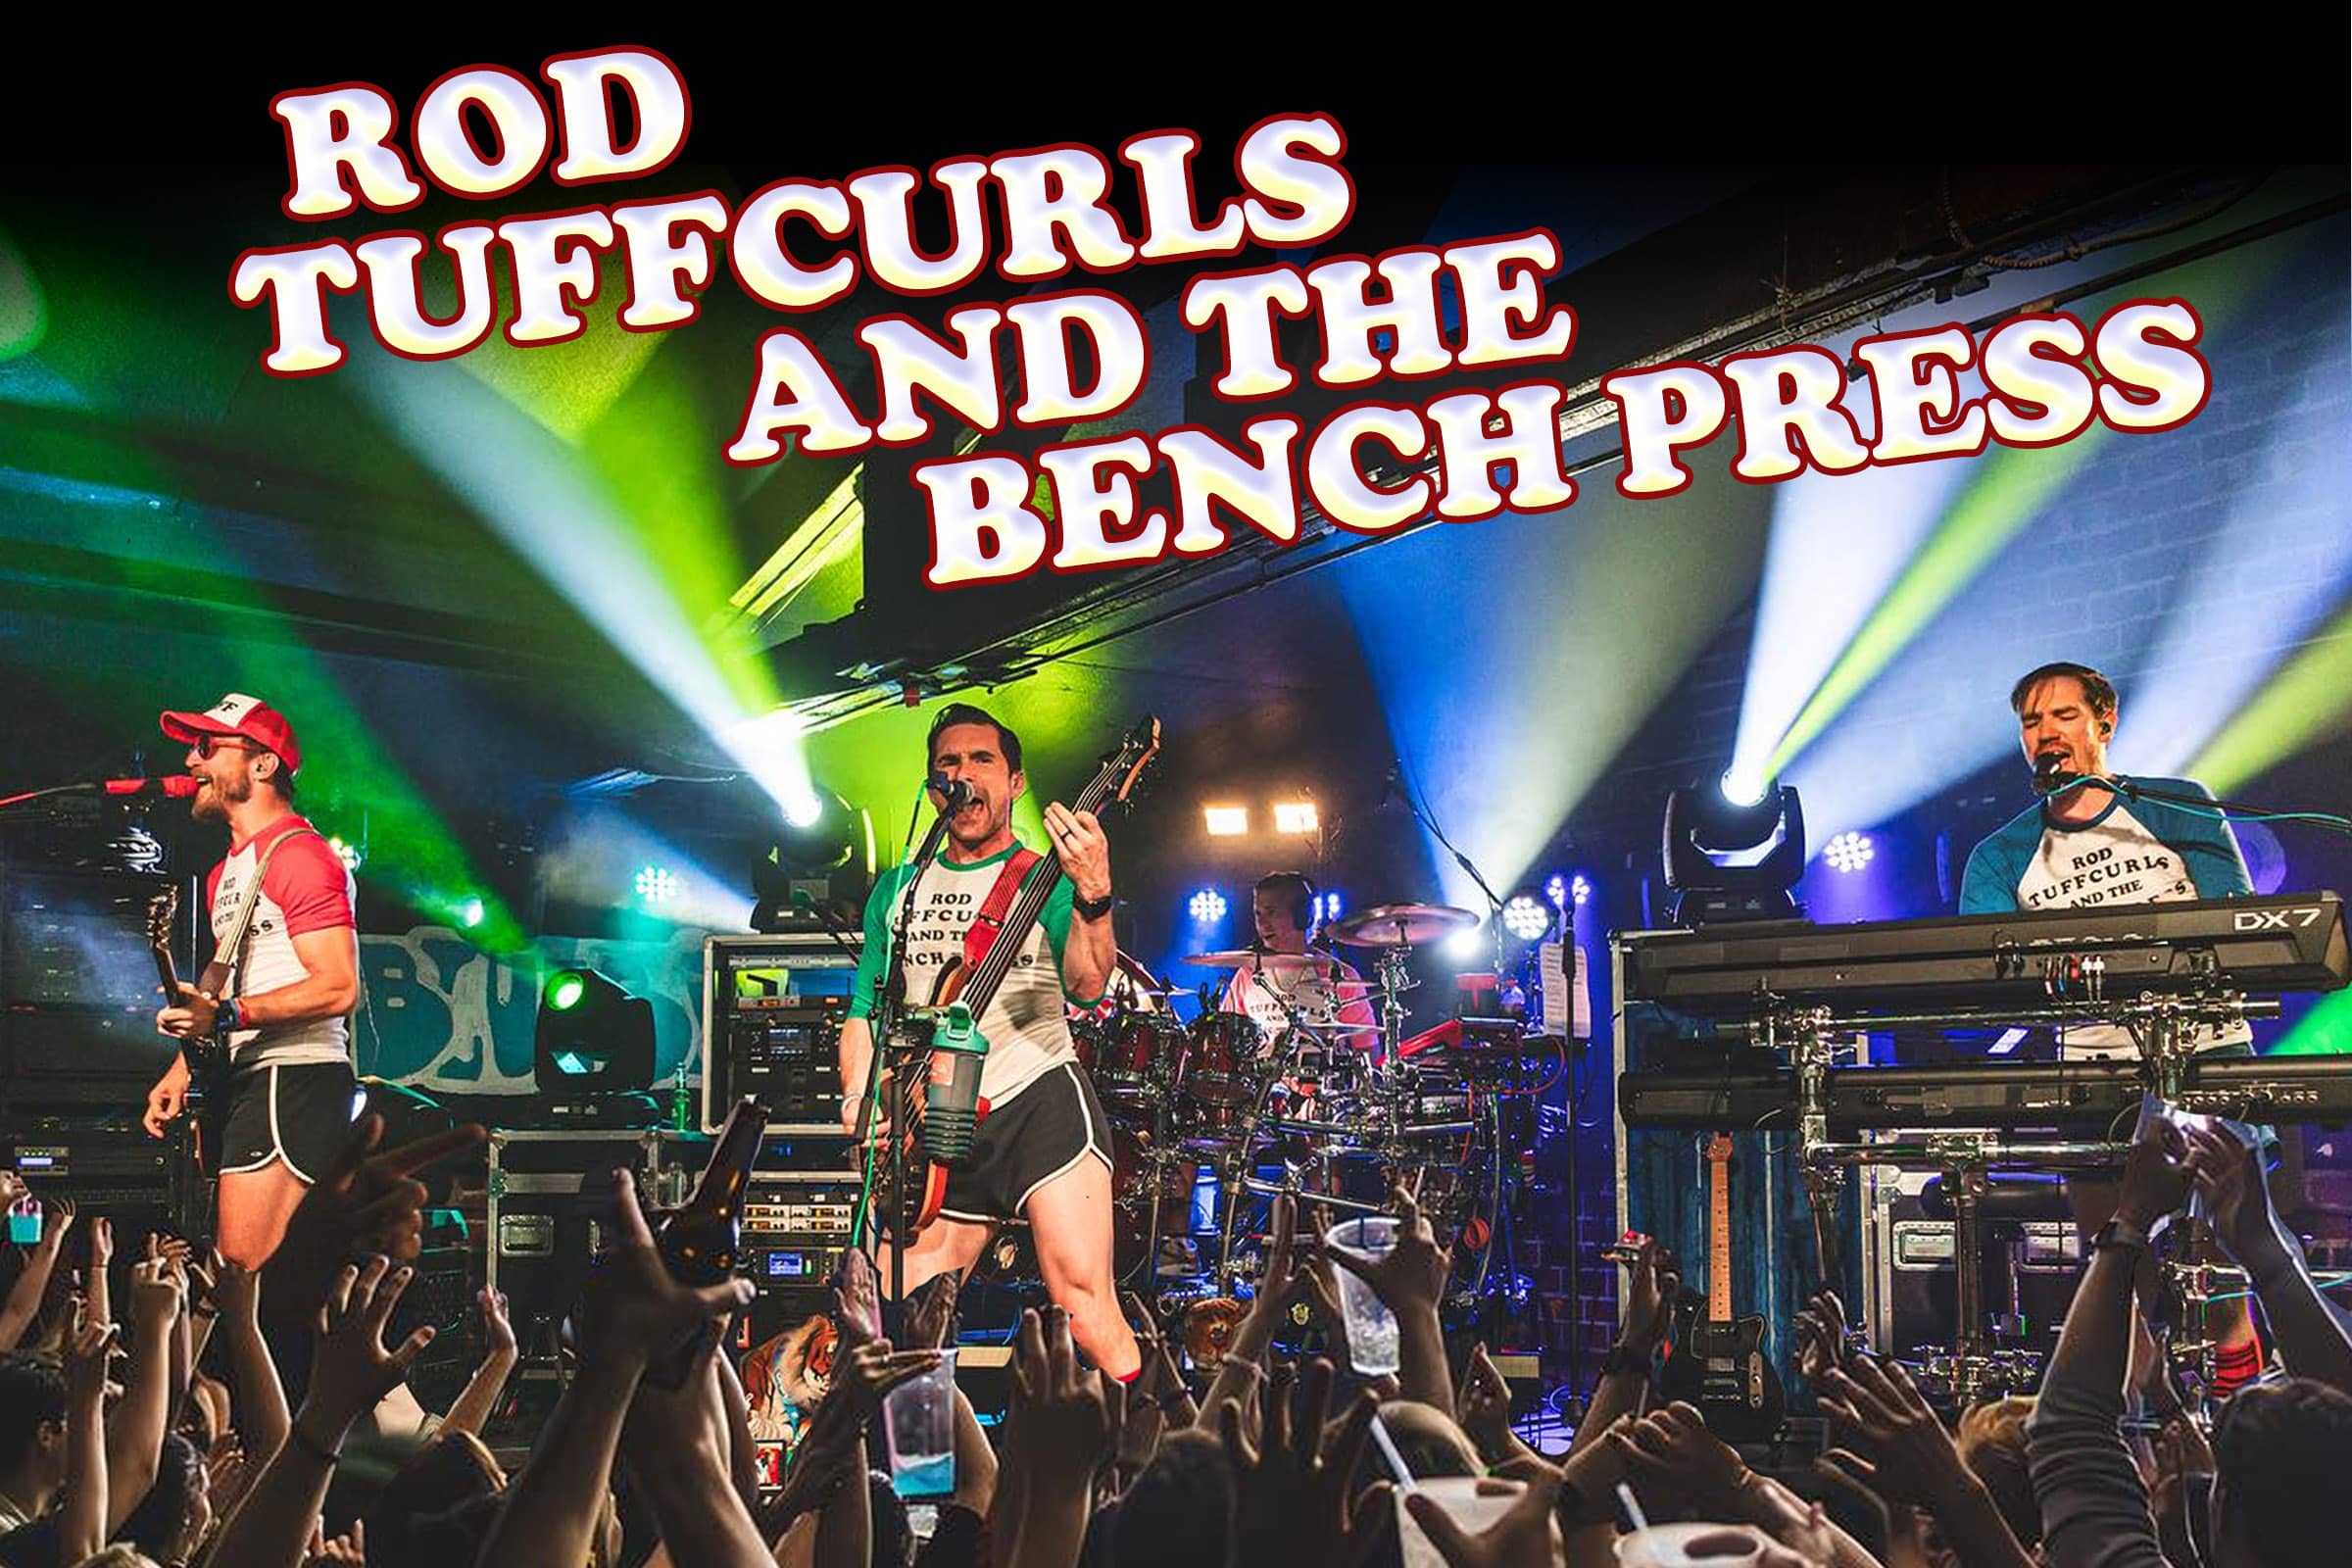 Poster for Rod Tuffcurls and The Bench Press on November 18, 2023 at Joe's on Weed St.